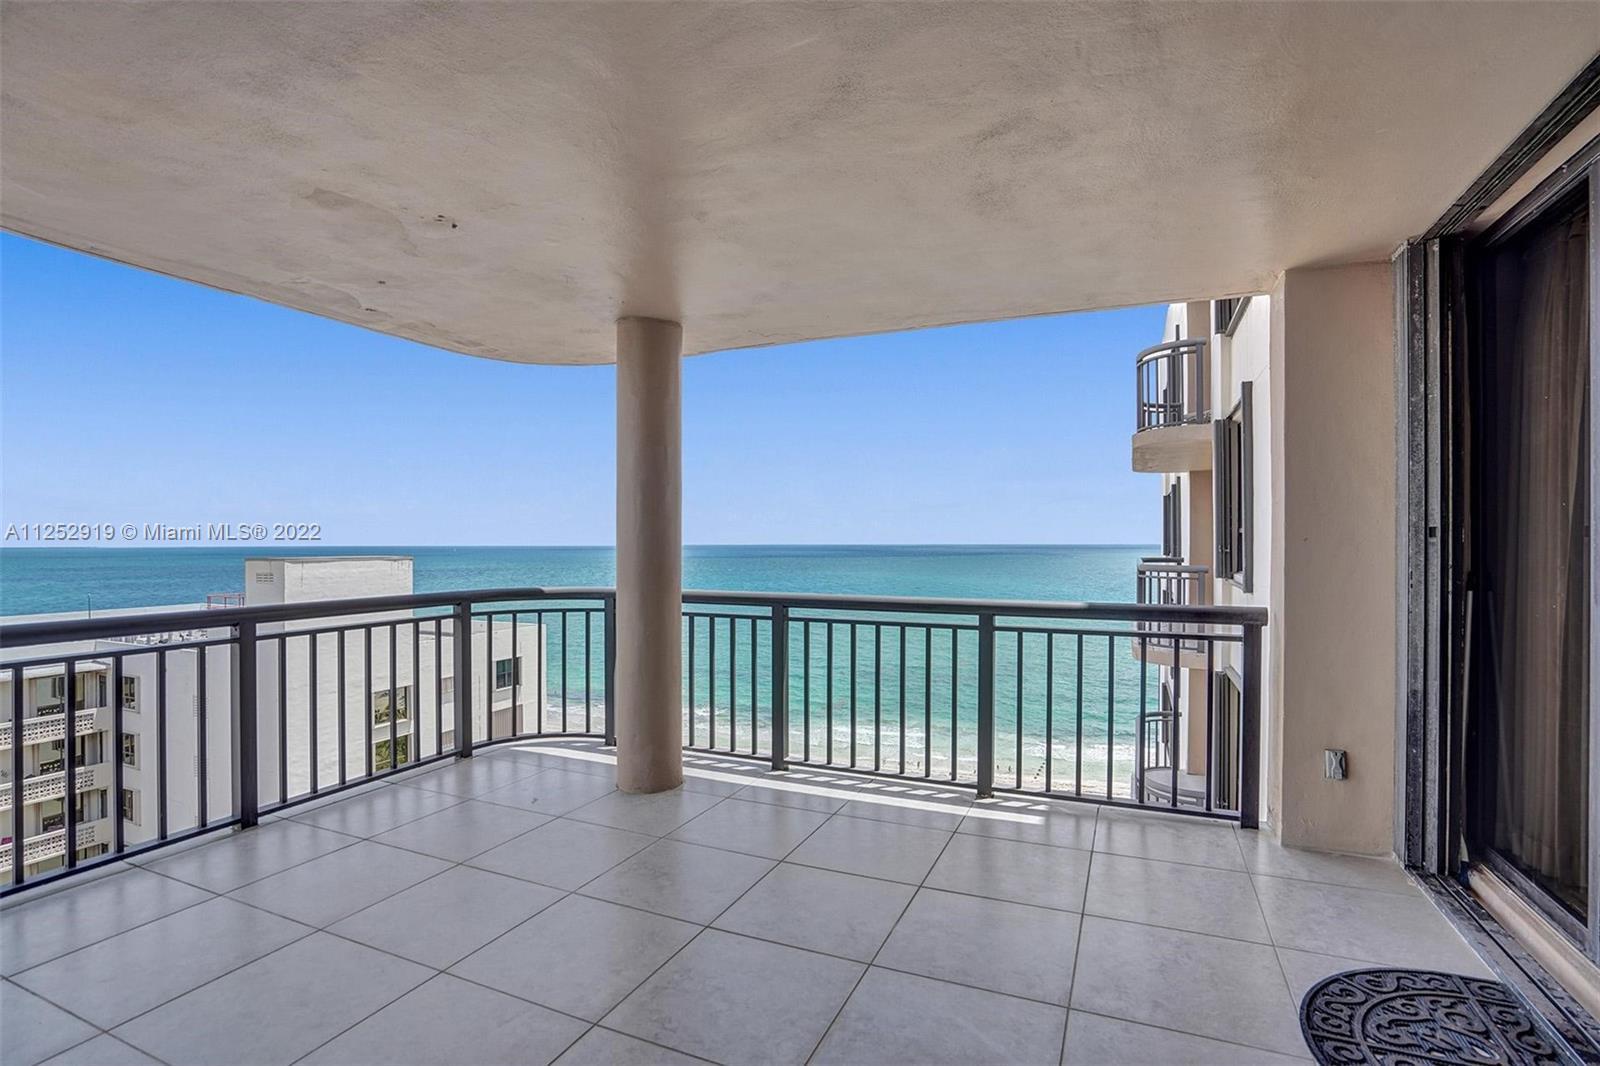 Huge price reduction!! Ocean-Ocean-Ocean view at this spectacular unit at the Tiffany of Bal Harbour